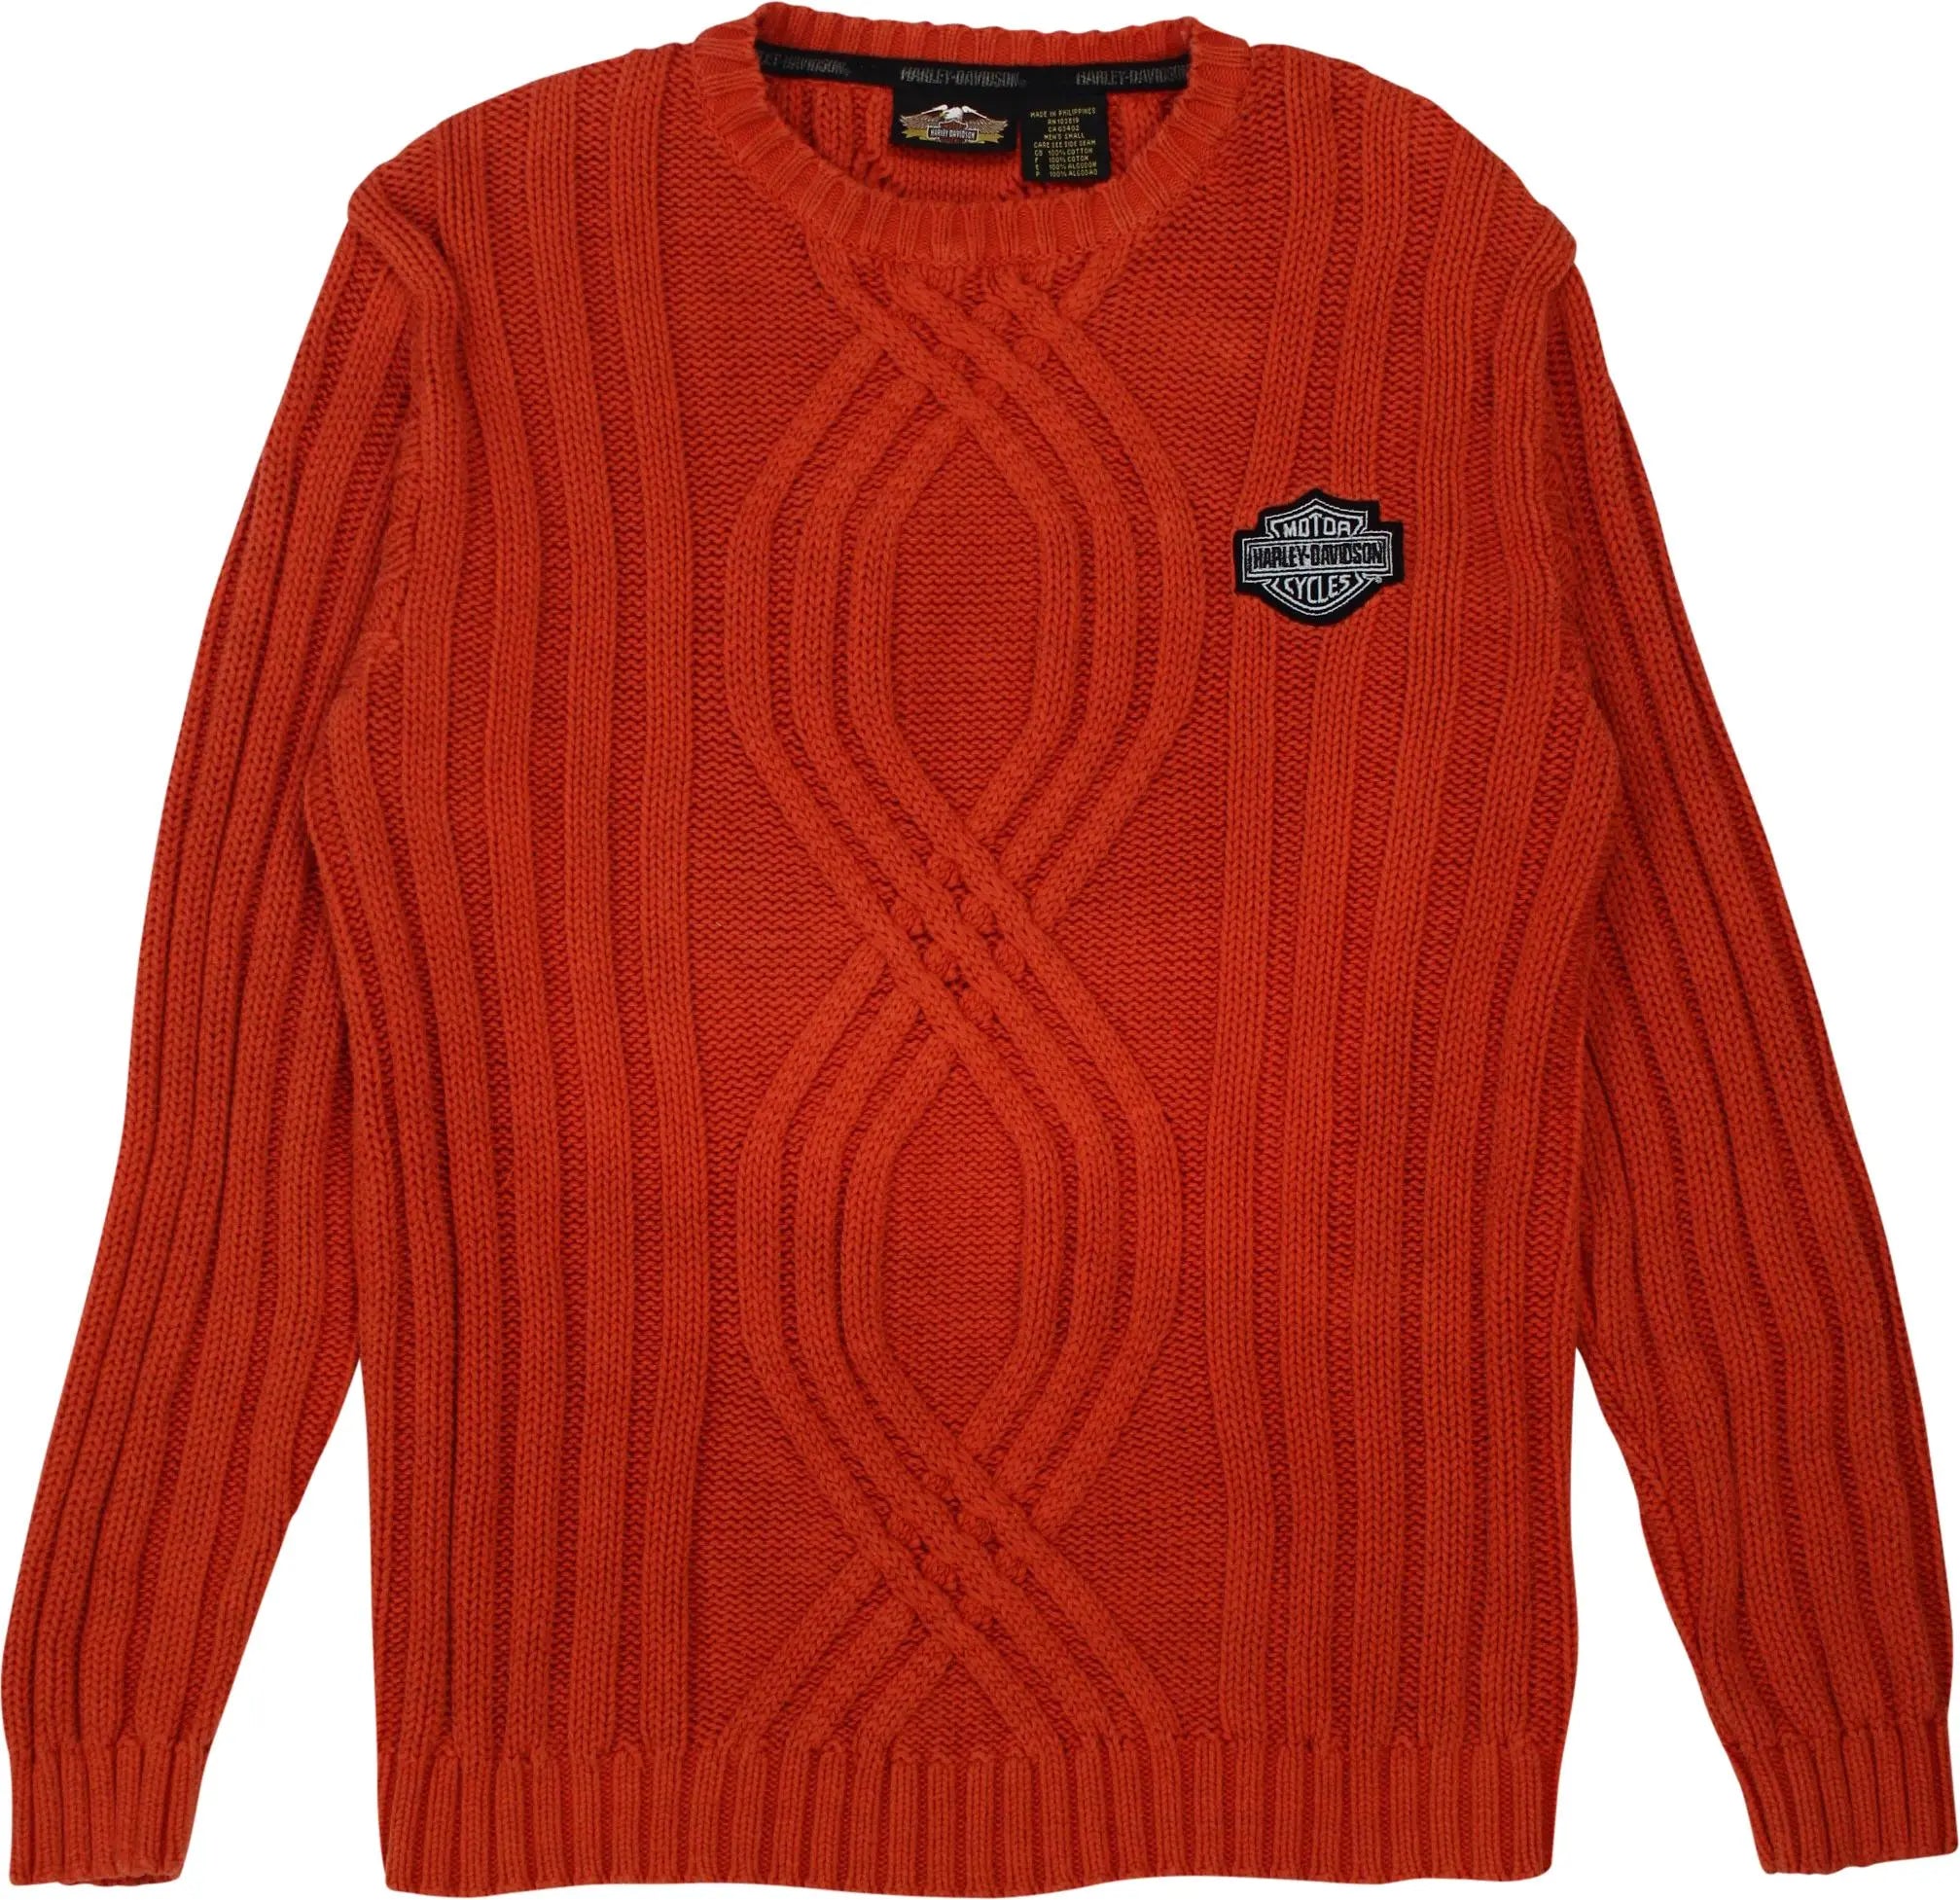 Harley Davidson - Orange Knitted Sweater by Harley Davidson- ThriftTale.com - Vintage and second handclothing